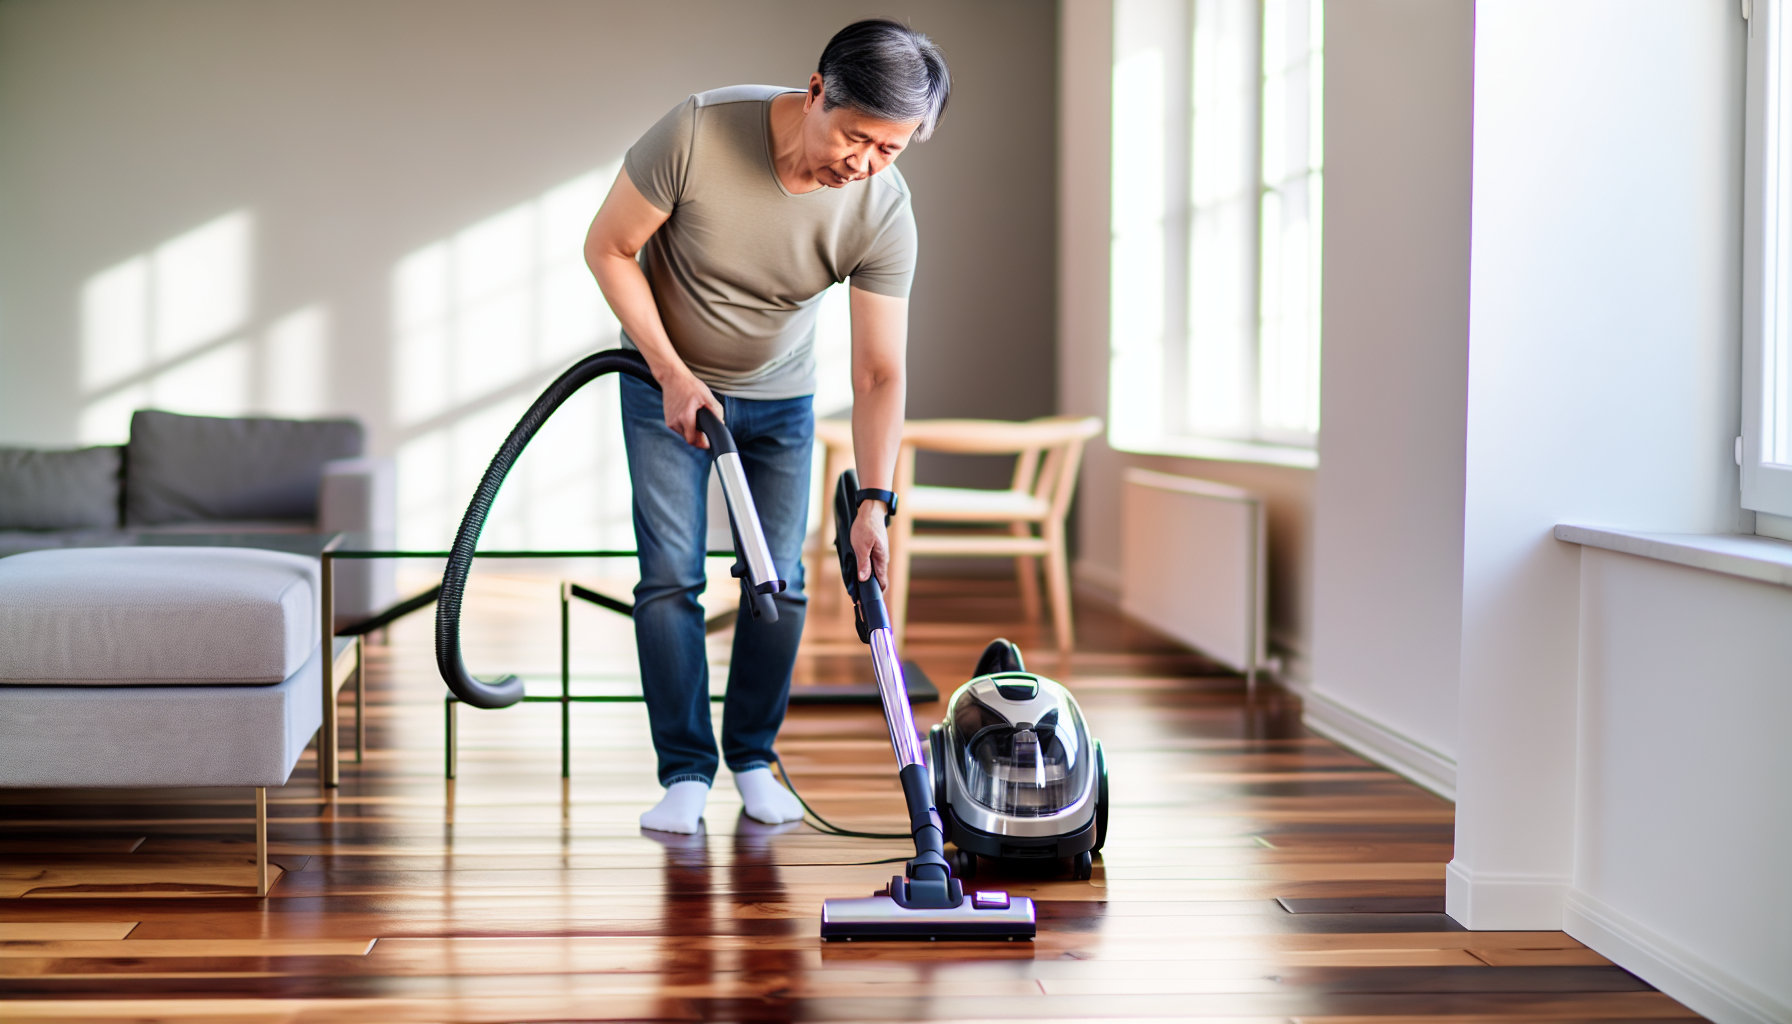 A person using a vacuum cleaner on hardwood floors, illustrating the easy maintenance and health benefits of wood flooring